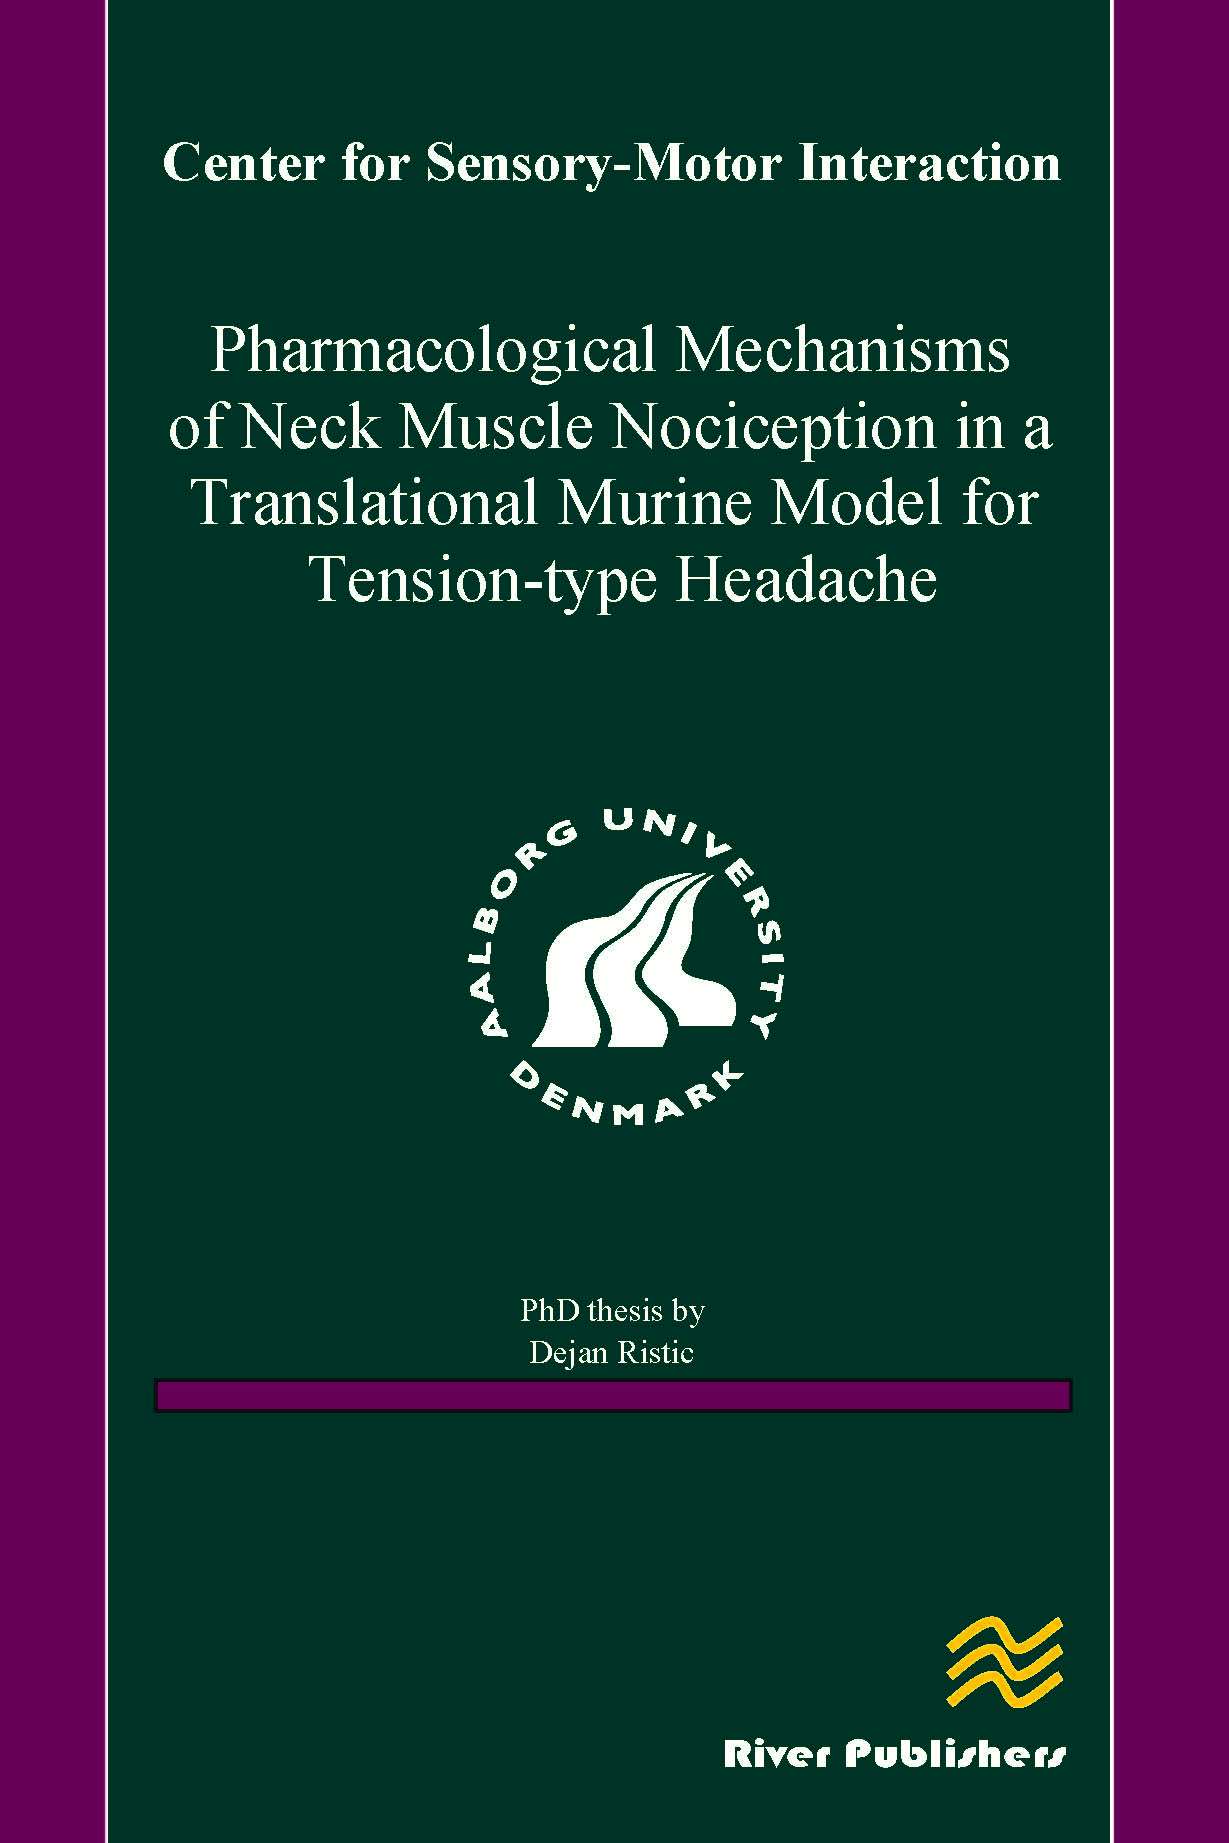 Pharmacological Mechanisms of Neck Muscle Nociception in a Translational Murine Model for Tension-Type Headache